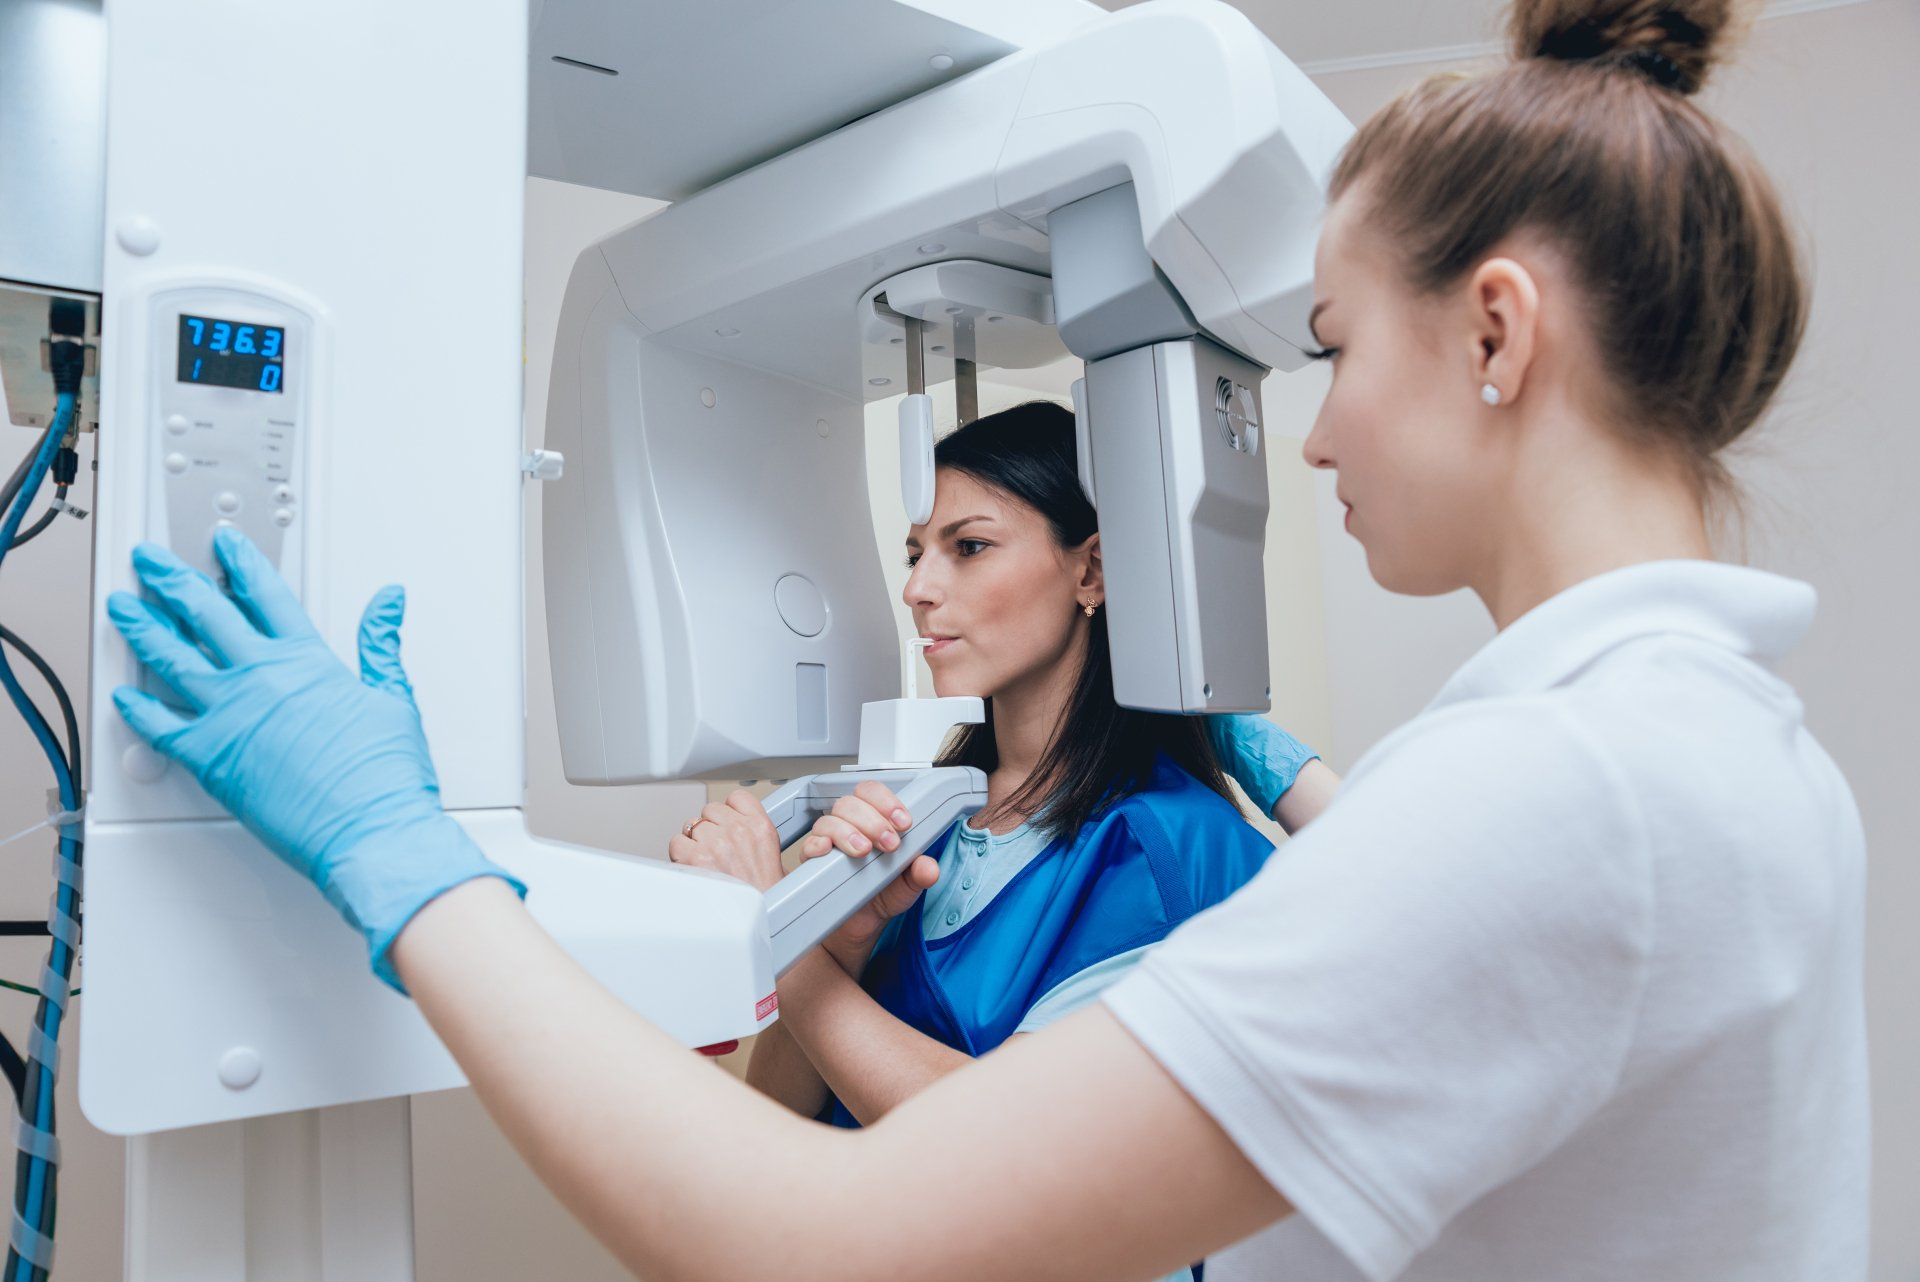 Dental technology | x ray machine | dentist near you | female patient getting an x ray | Woo Dental | Best Dentist in Newmarket, ON